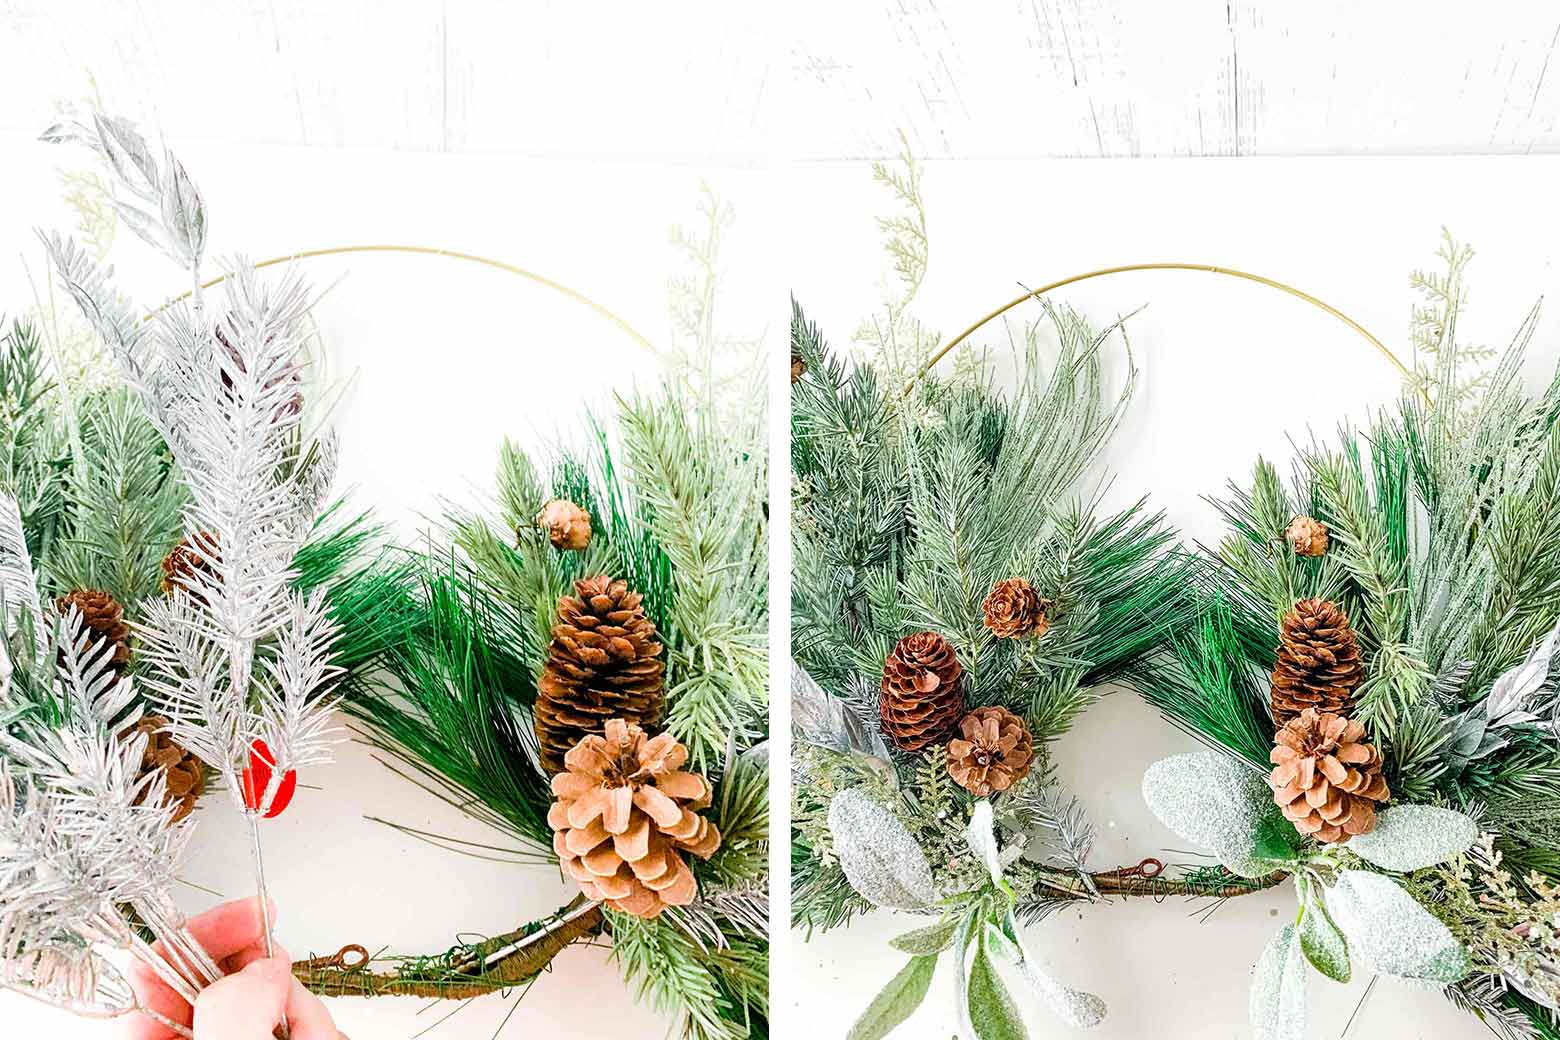 adding accents like pinecones and glitter stems to a wreath